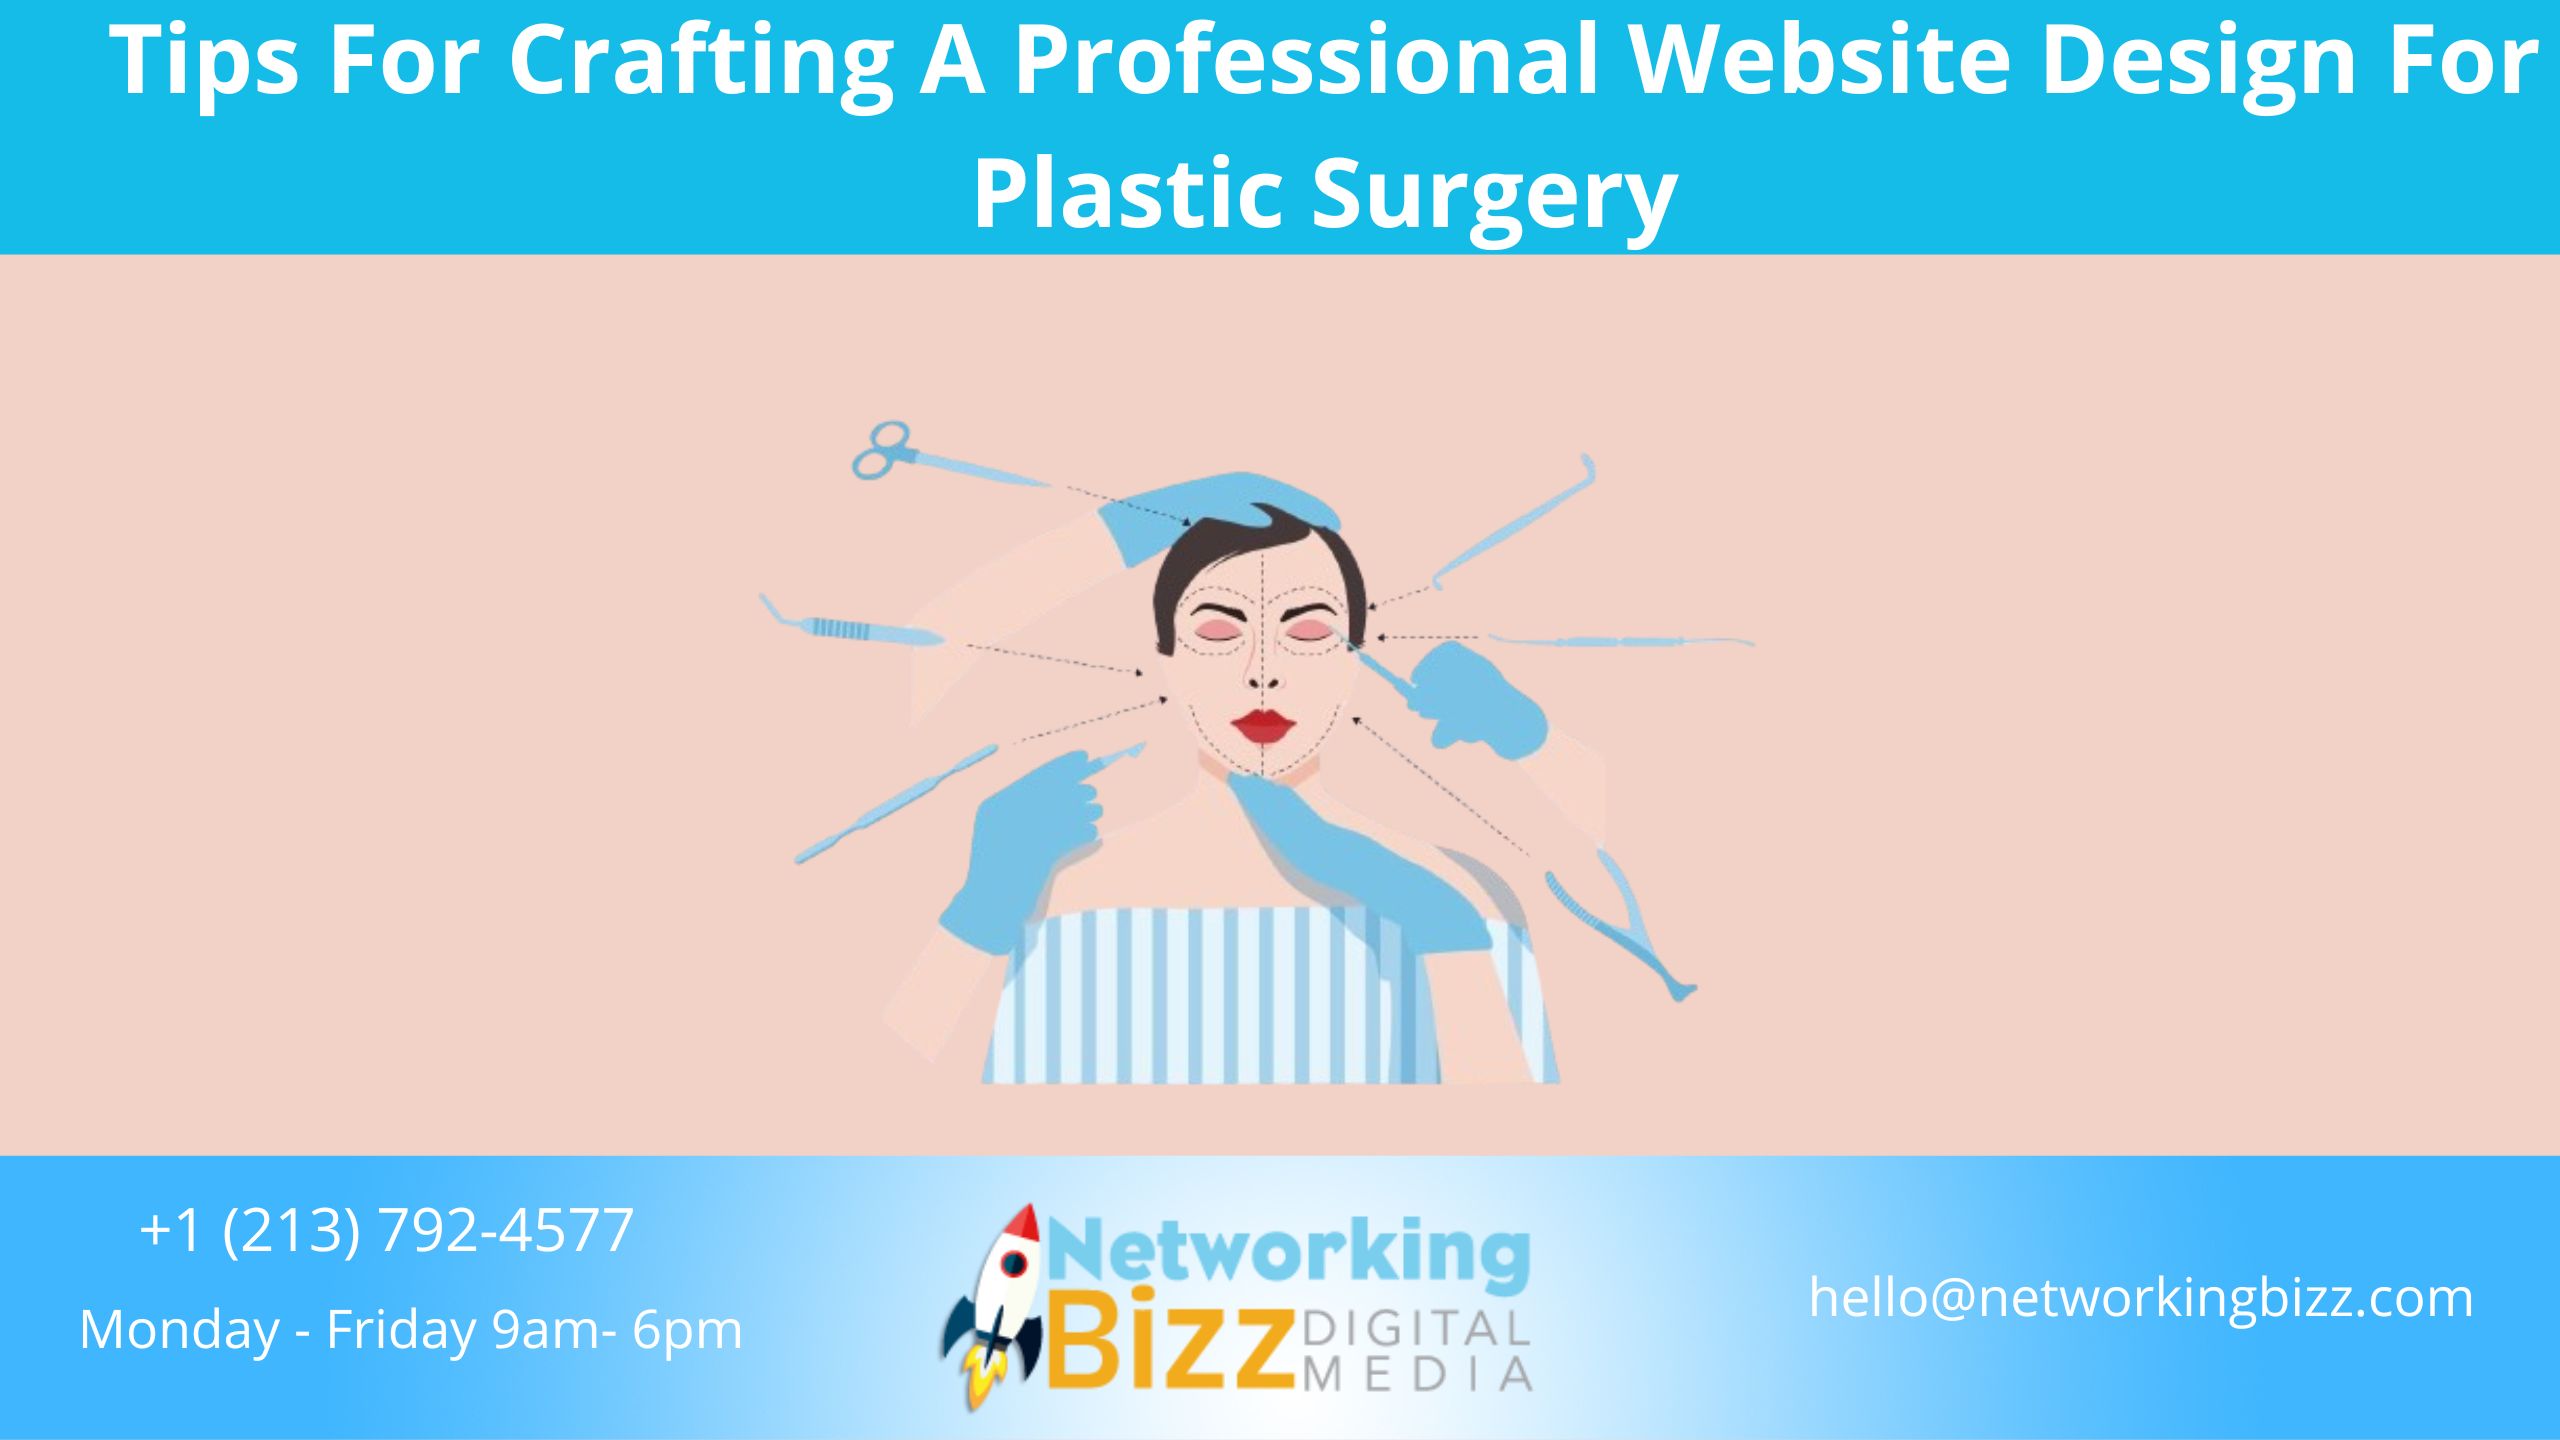 Tips For Crafting A Professional Website Design For Plastic Surgery